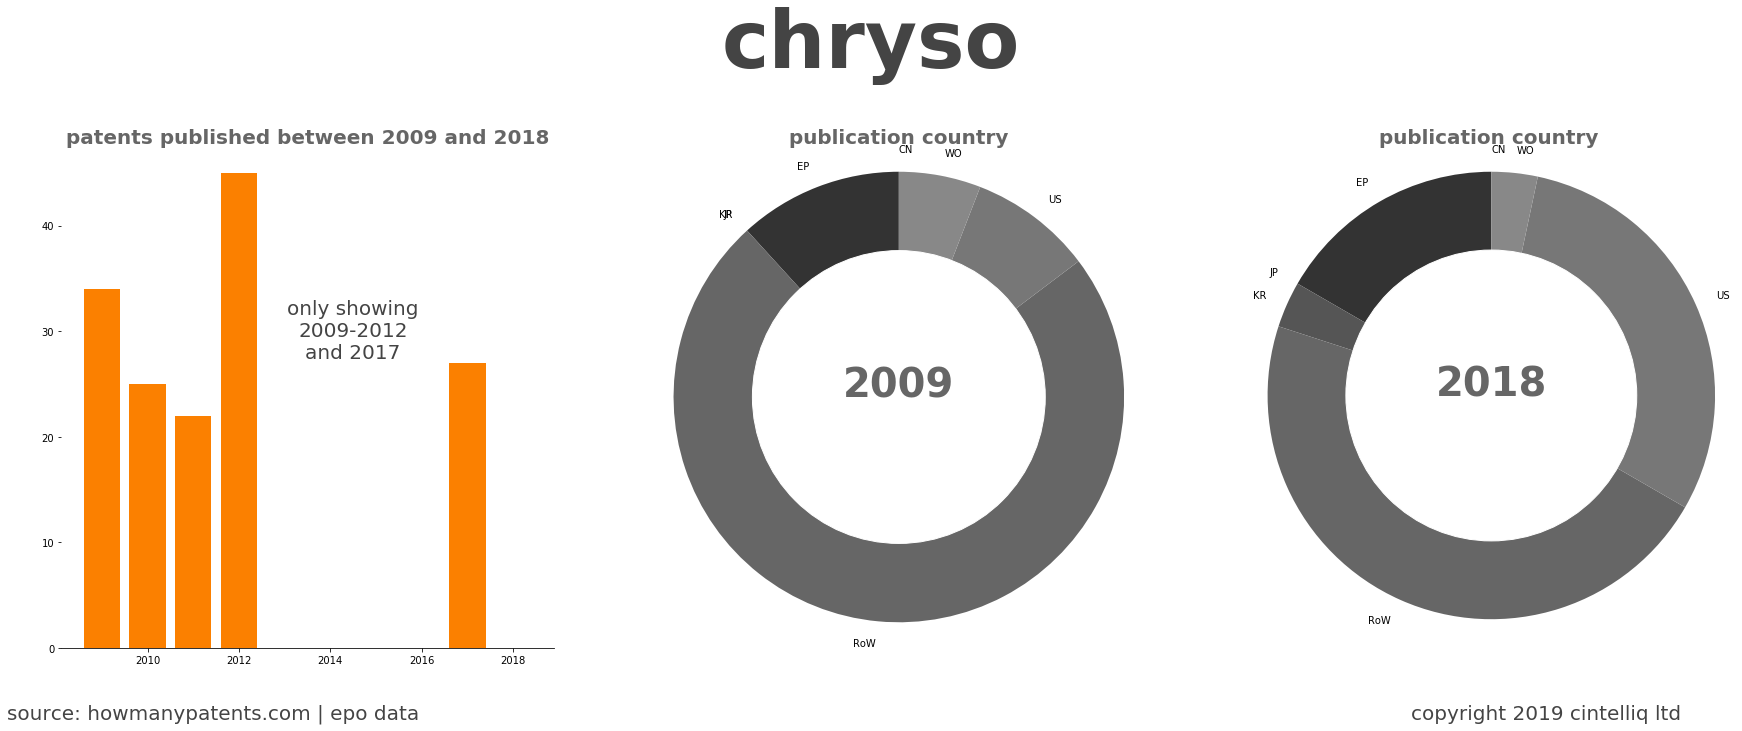 summary of patents for Chryso